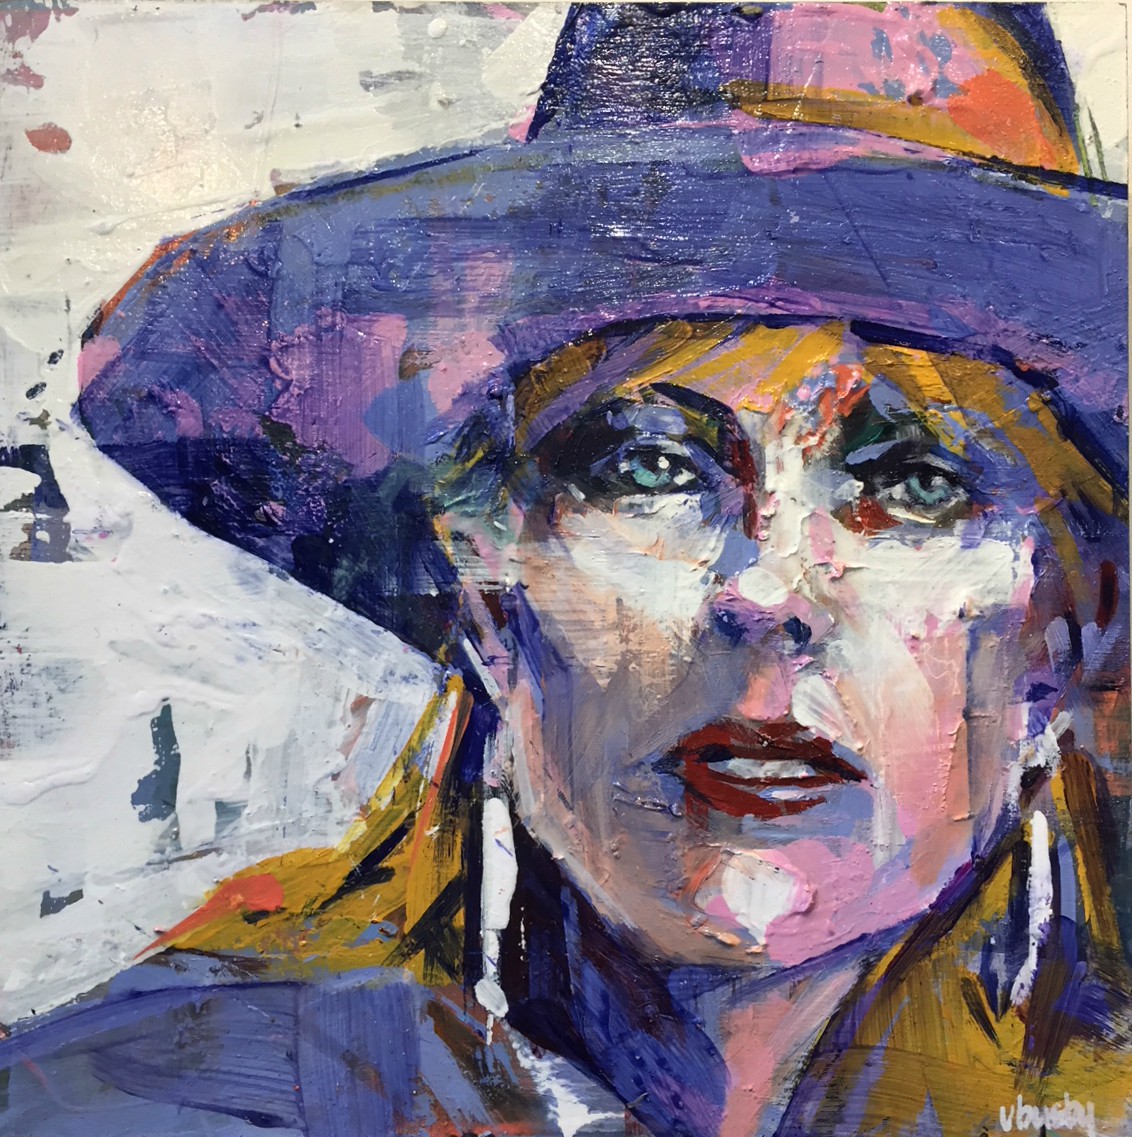 Joni Mitchell painting by Verne Busby | Effusion Art Gallery + Cast Glass Studio, Invermere BC